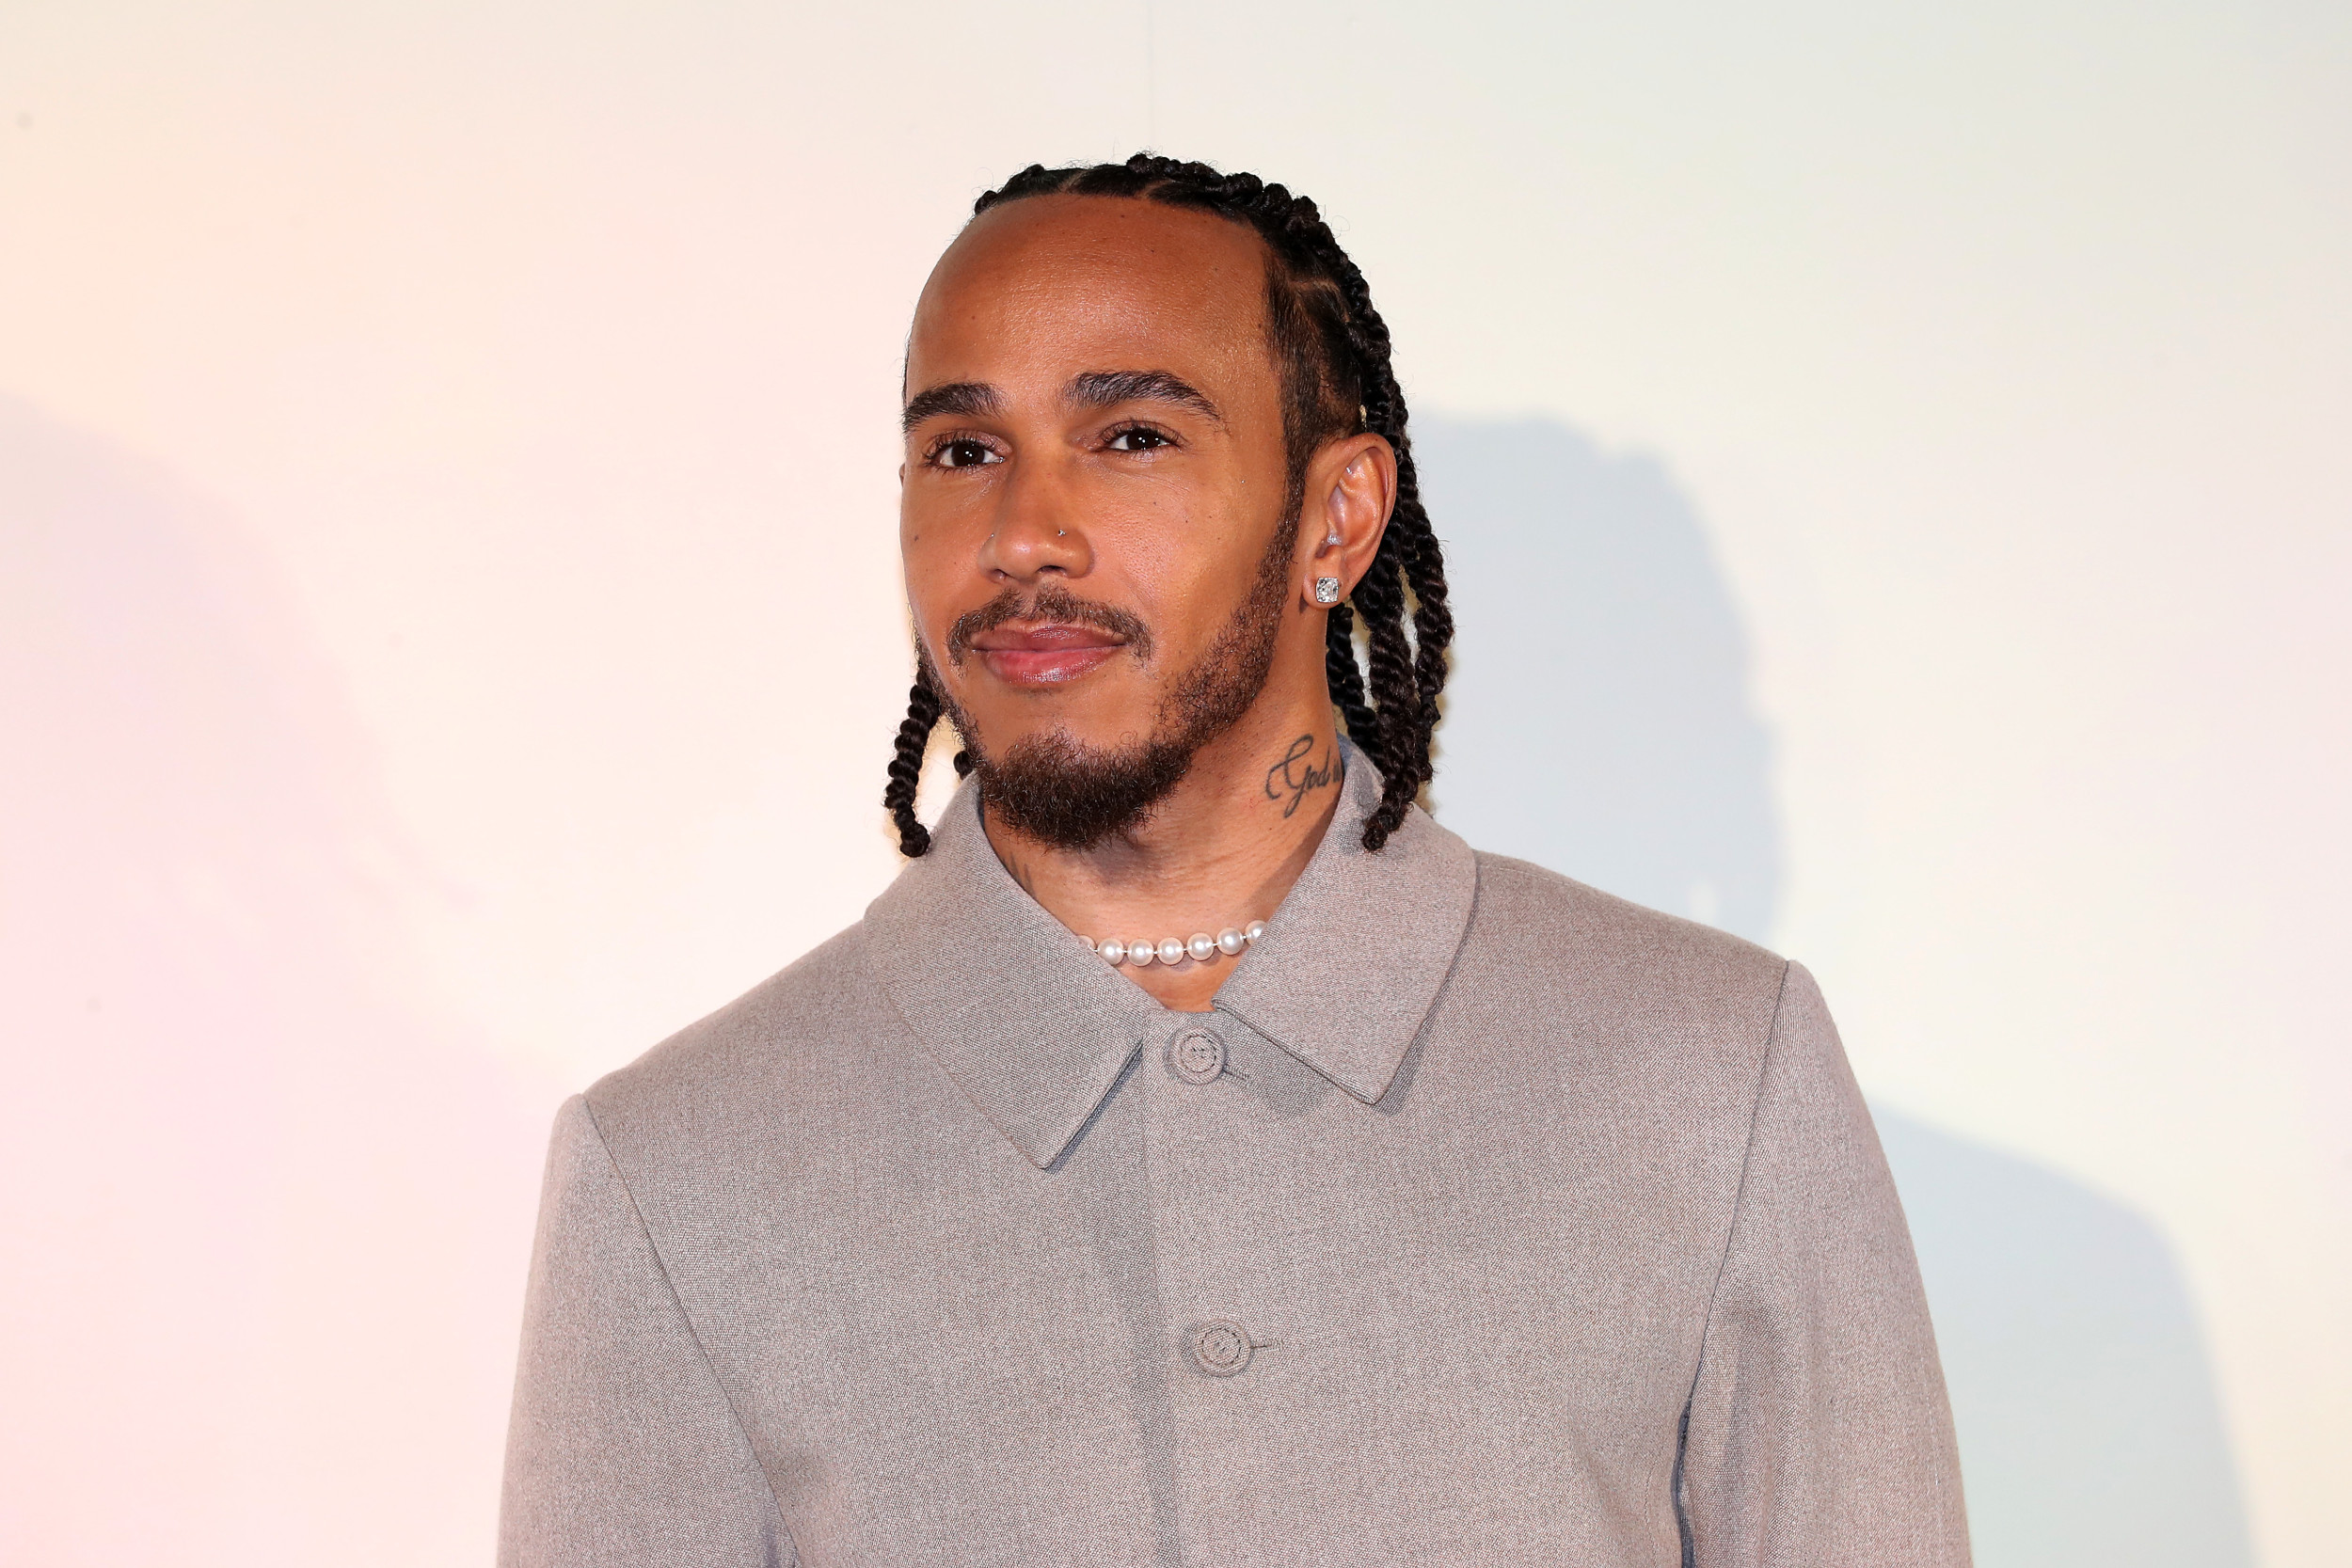 Lewis Hamilton ‘Kept Up at Night’ After Recent Poor Performance [Video]